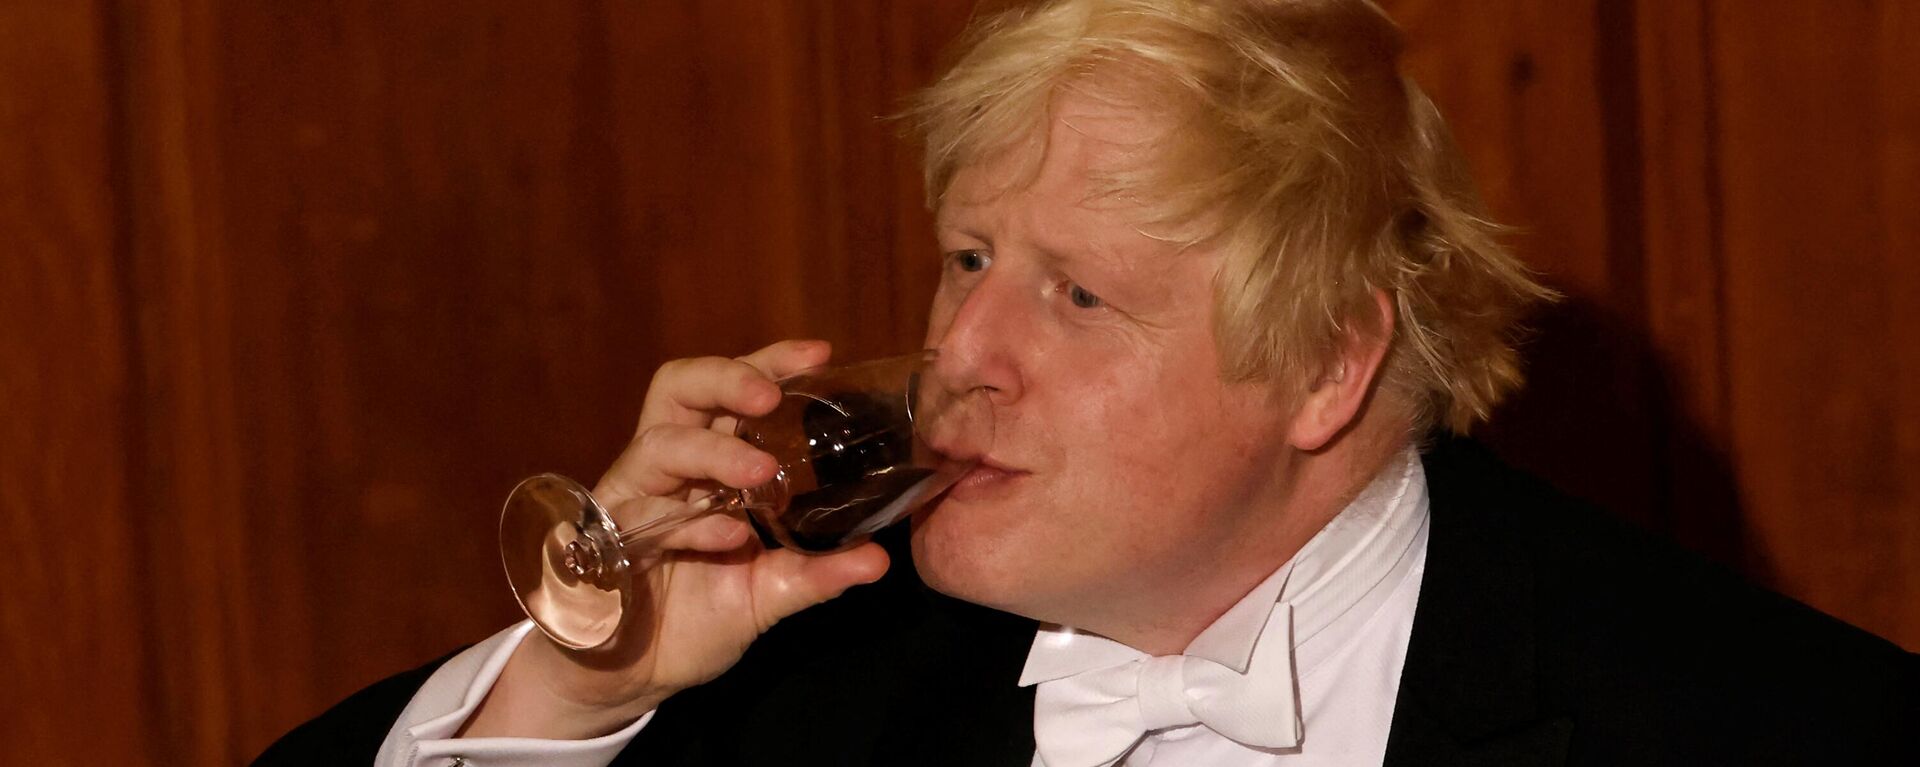 Britain's Prime Minister Boris Johnson drinks from a wine glass during the Lord Mayor's Banquet in central London on November 15, 2021 - Sputnik International, 1920, 09.01.2022